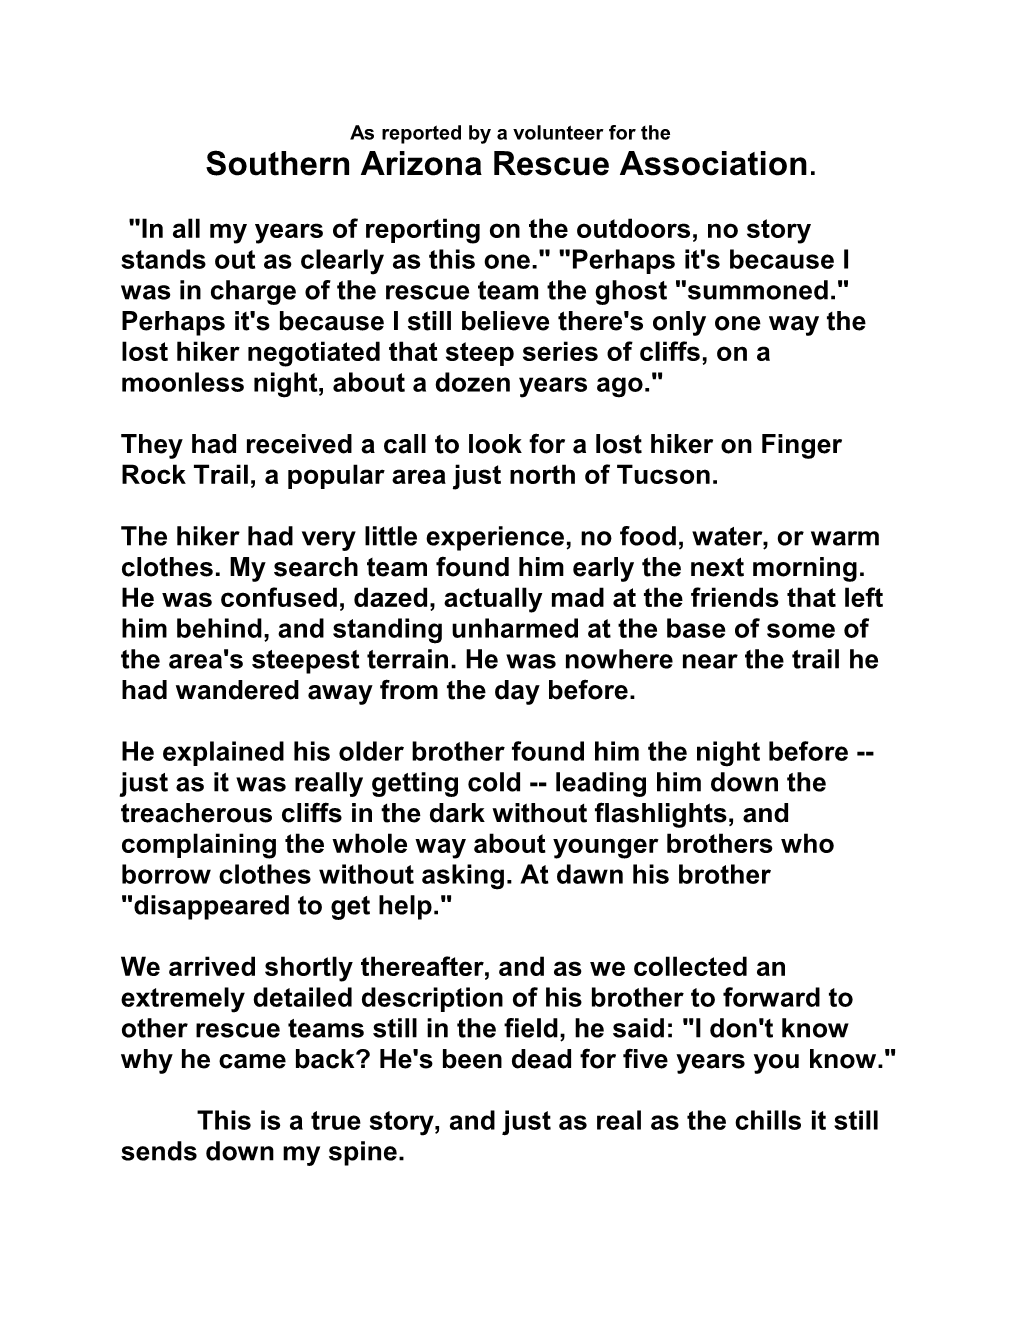 As Reported by a Volunteer for the Southern Arizona Rescue Association